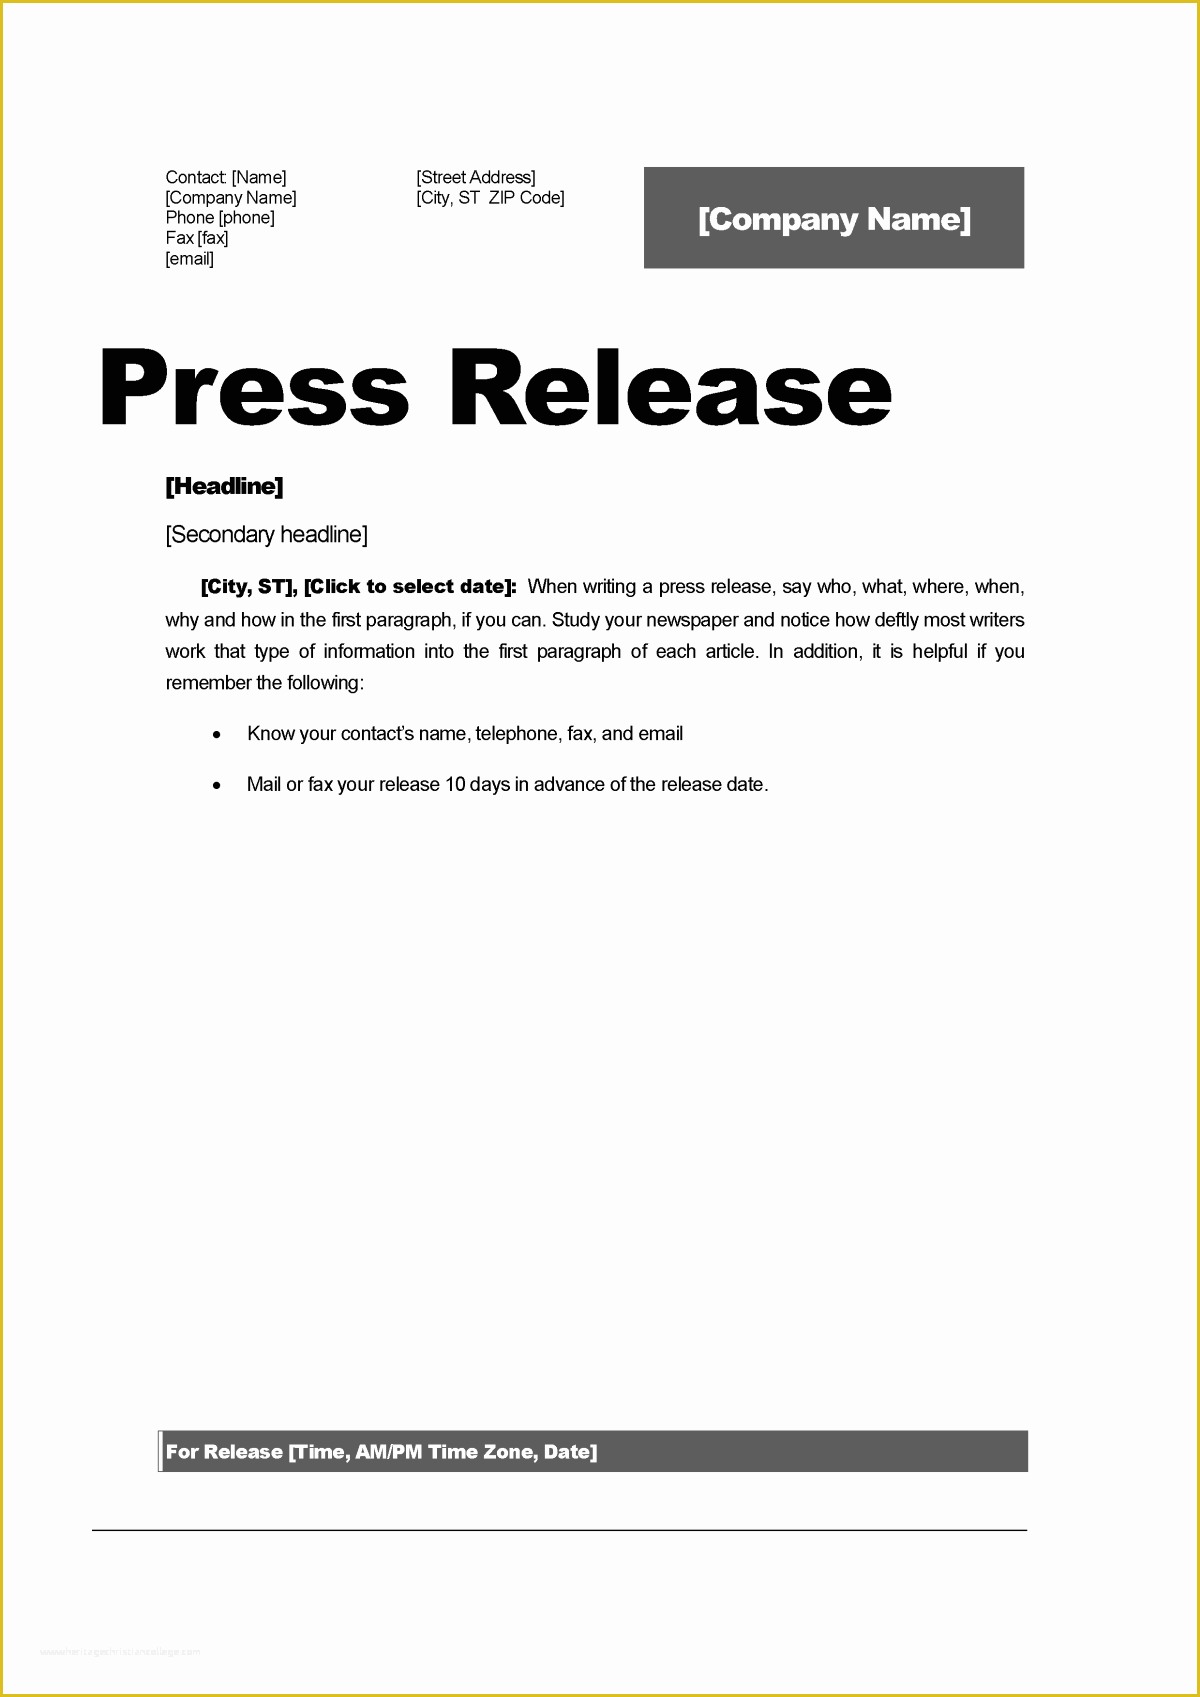 Free Press Release format Template Of top 5 Resources to Get Free Press Release Templates Word